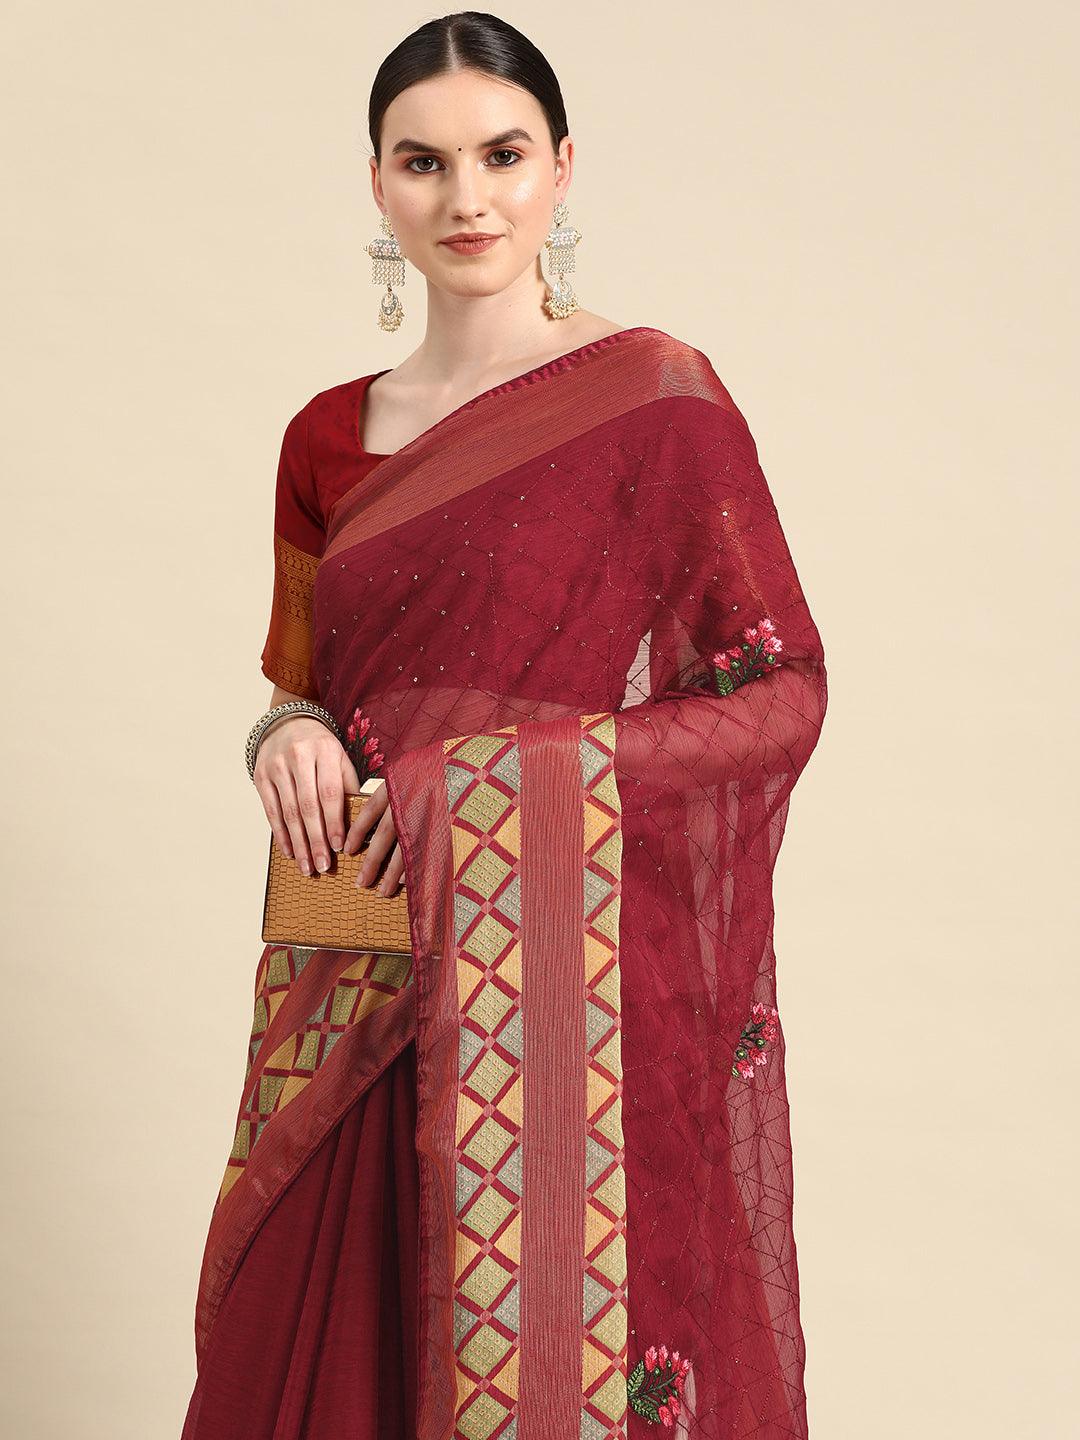 Stylish Trendy Floral Embroidered Designer Poly Chiffon Saree In Maroon - Indiakreations